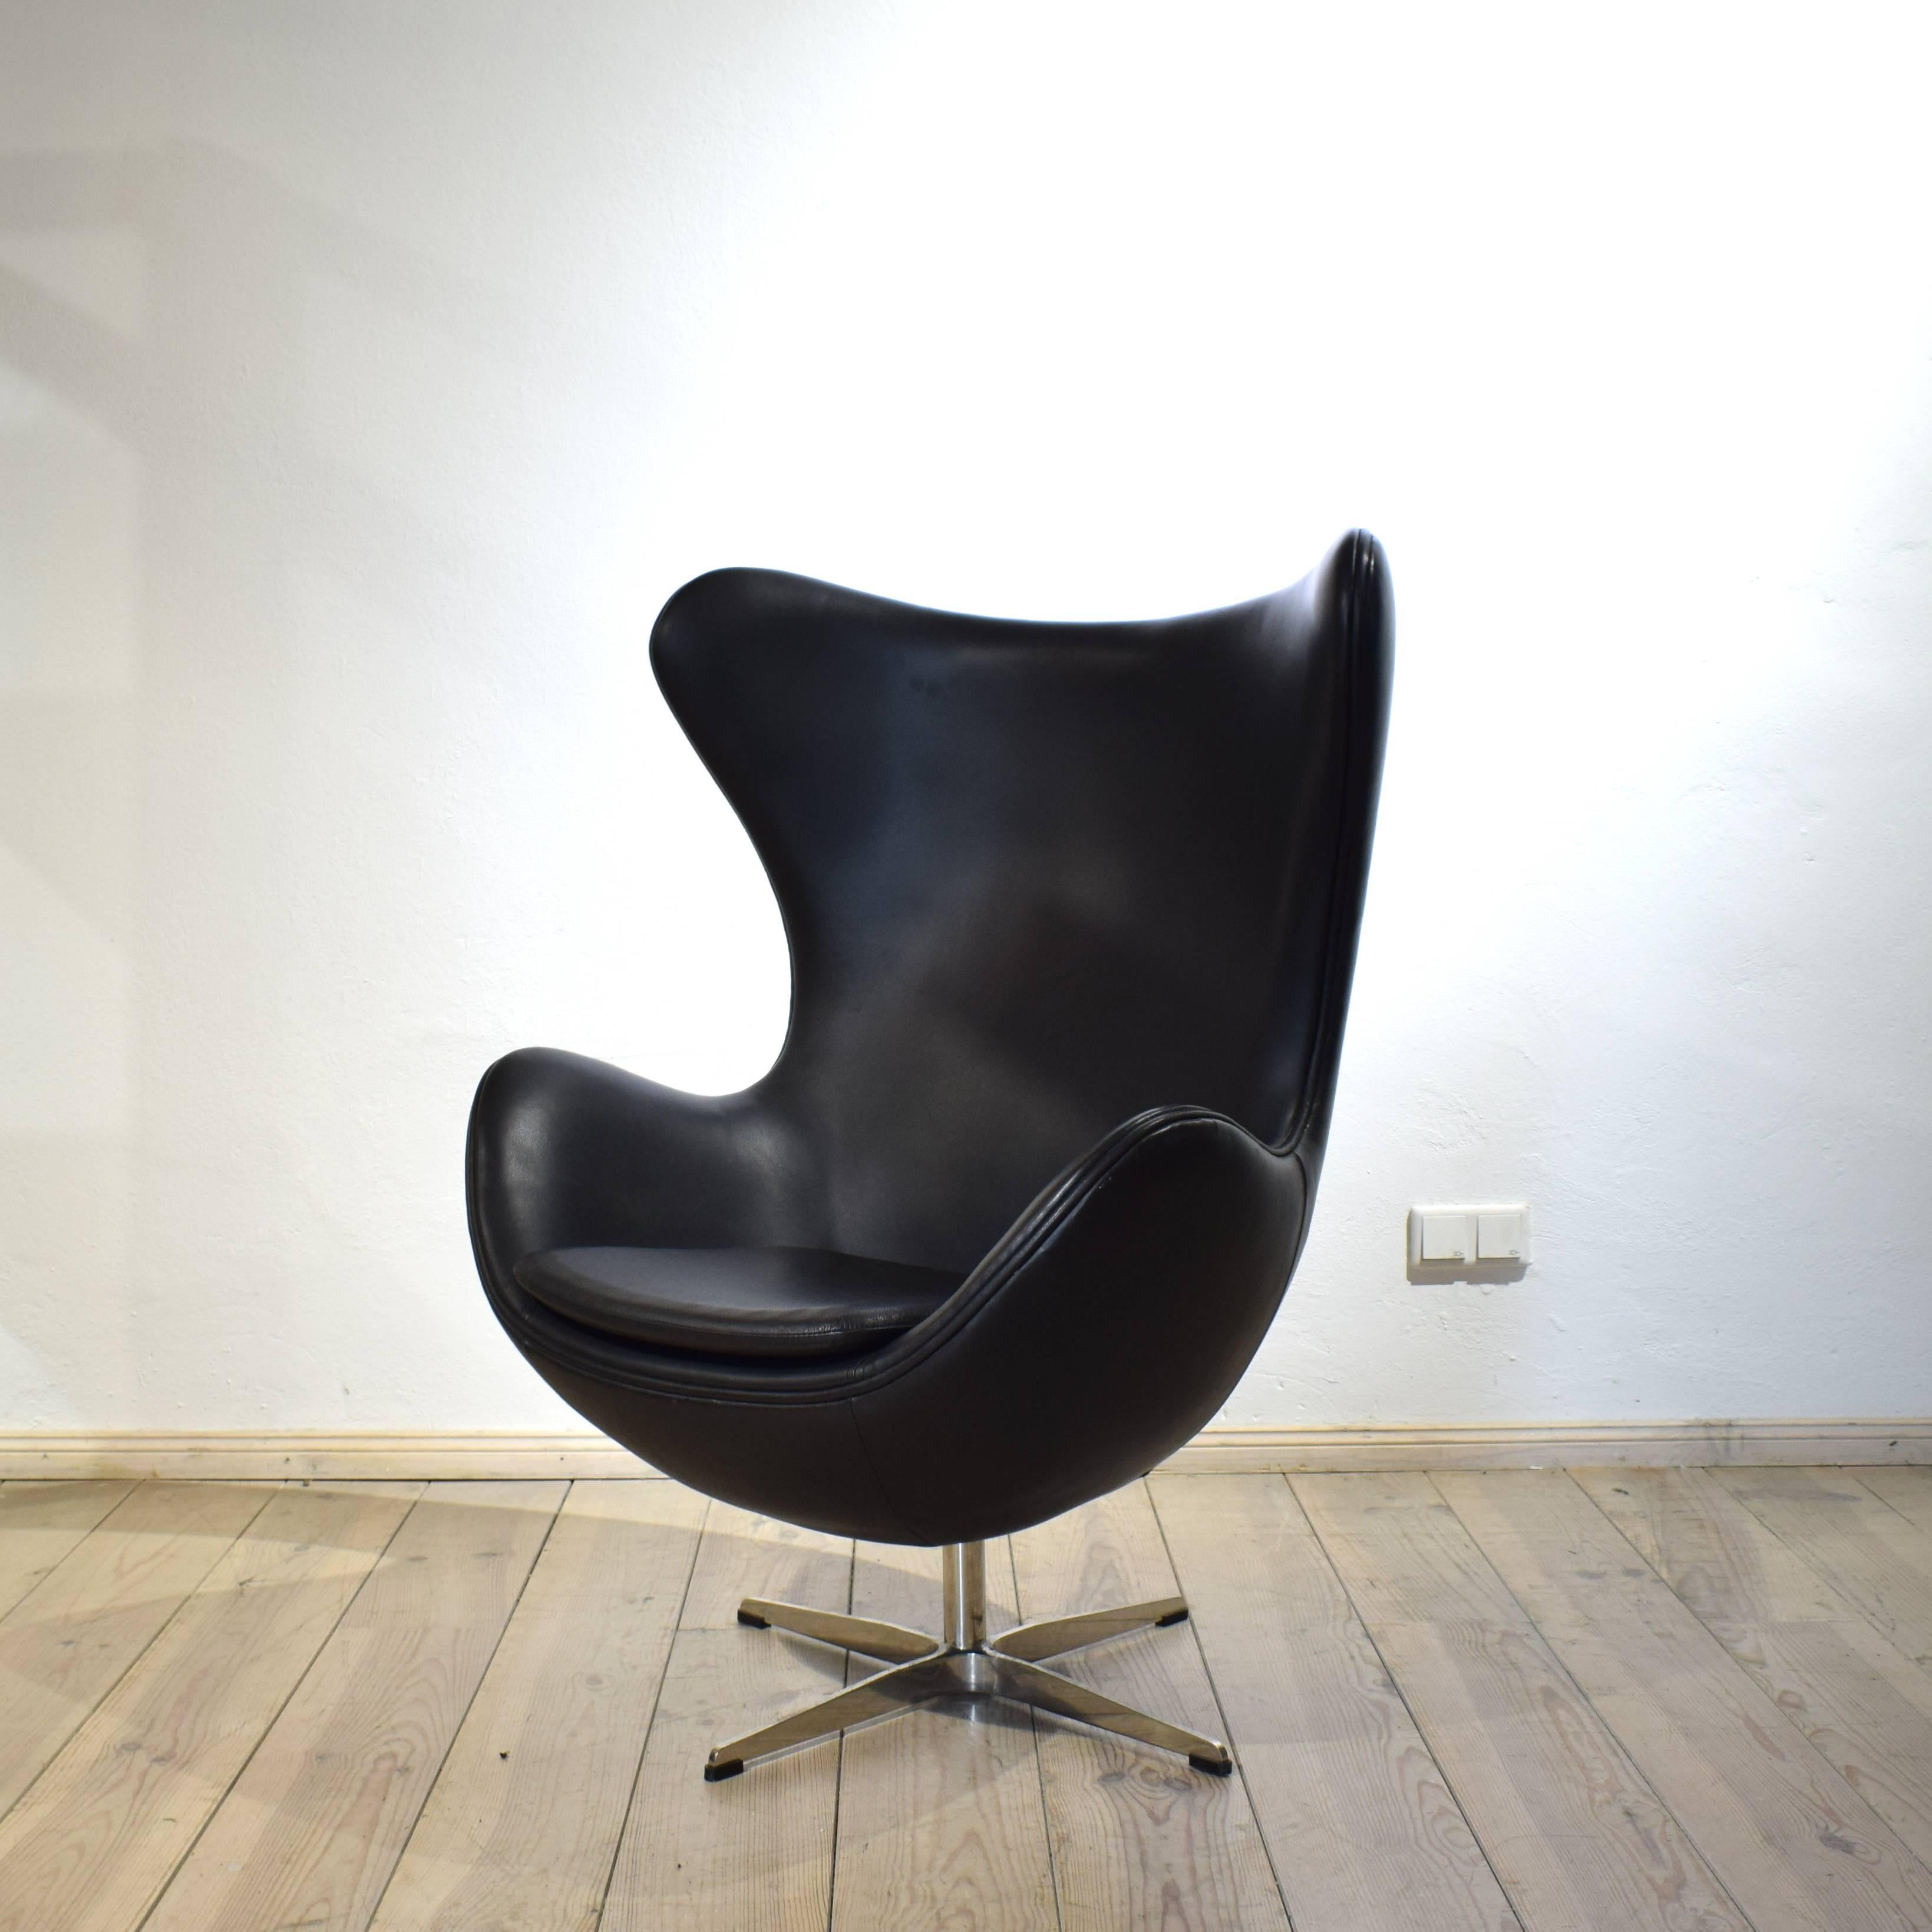 This midcentury Lounge chair was build in the style of Arne Jacobsen. It was made in the 1970. The chair contains its original black leather upholstery.
The chair is very comfortable and has a unique look.
A timeless piece of furniture which fits